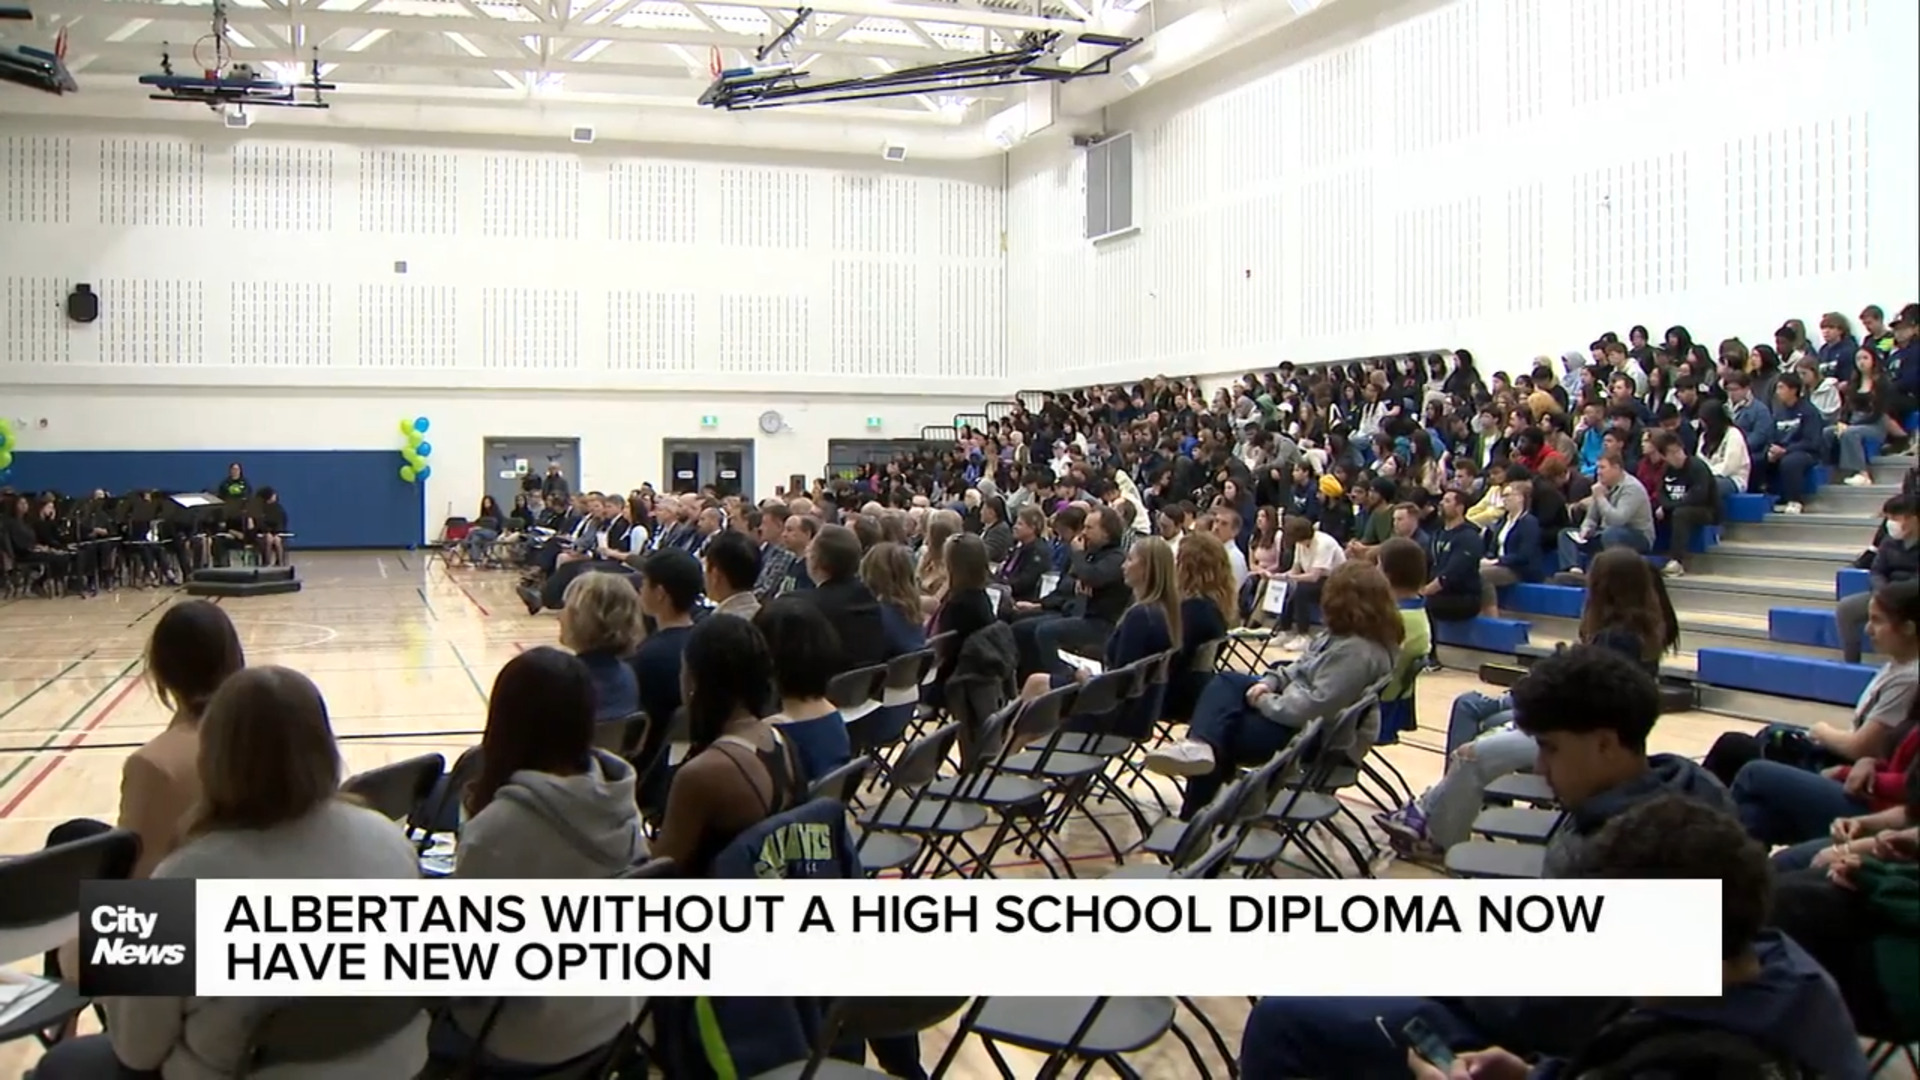 New option for Albertans without high school diploma